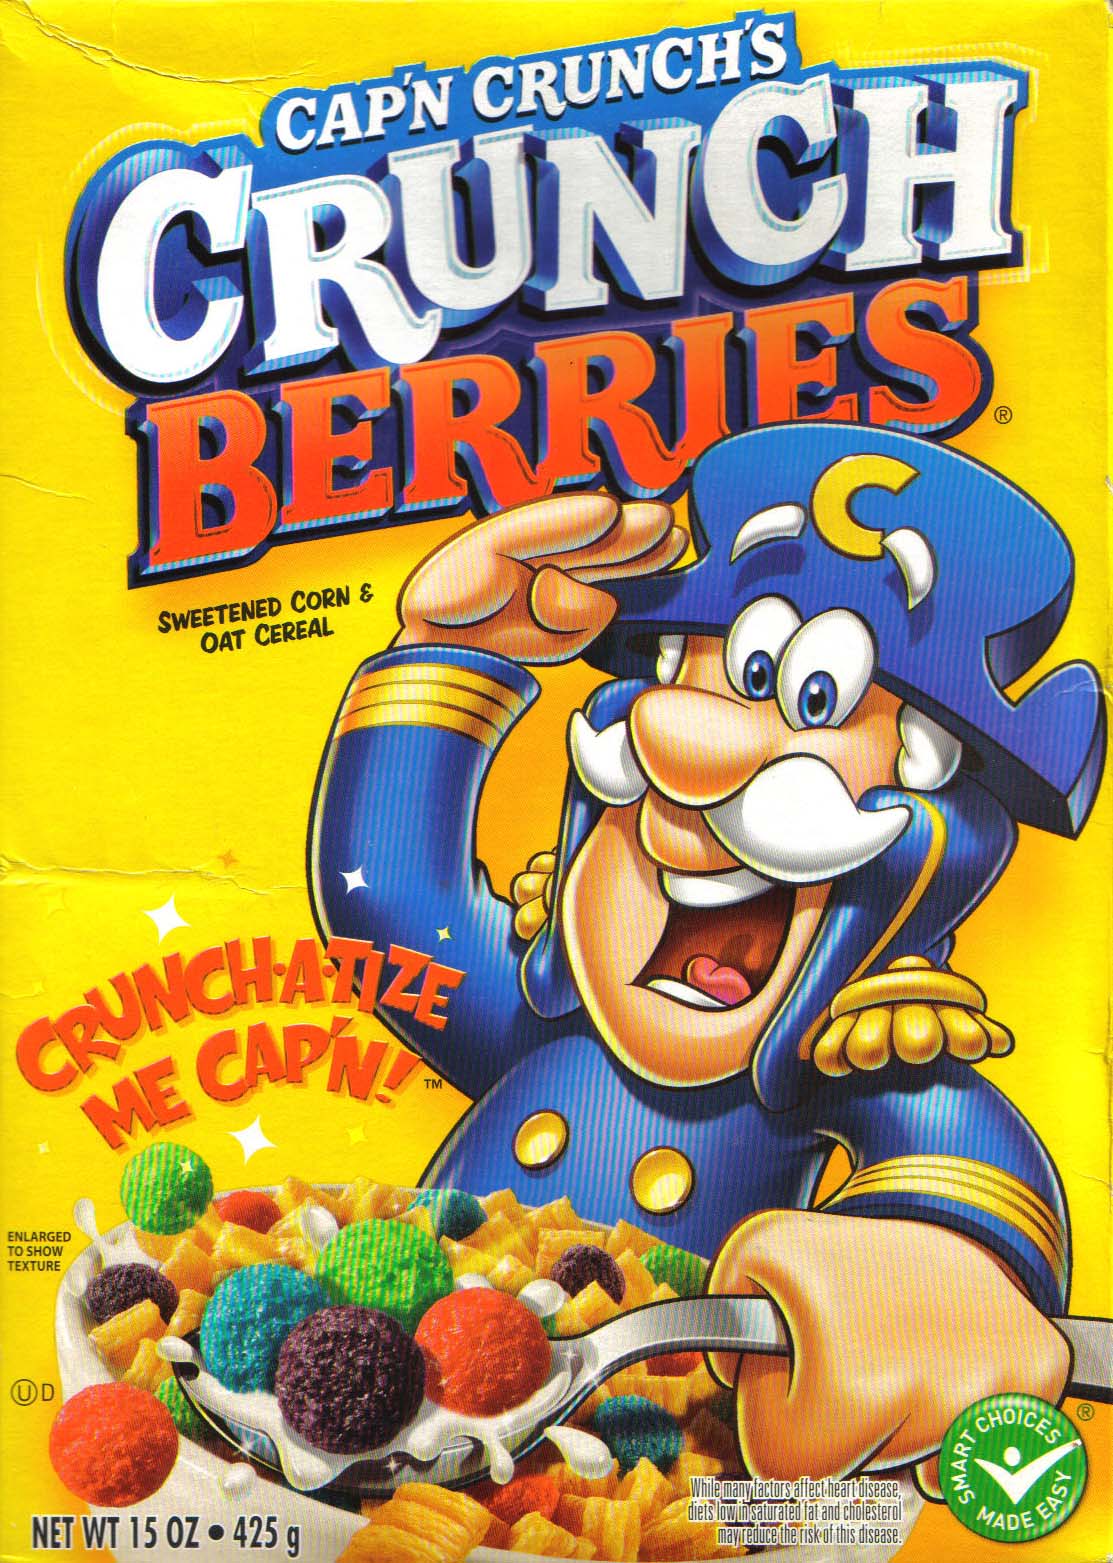 generic cereal